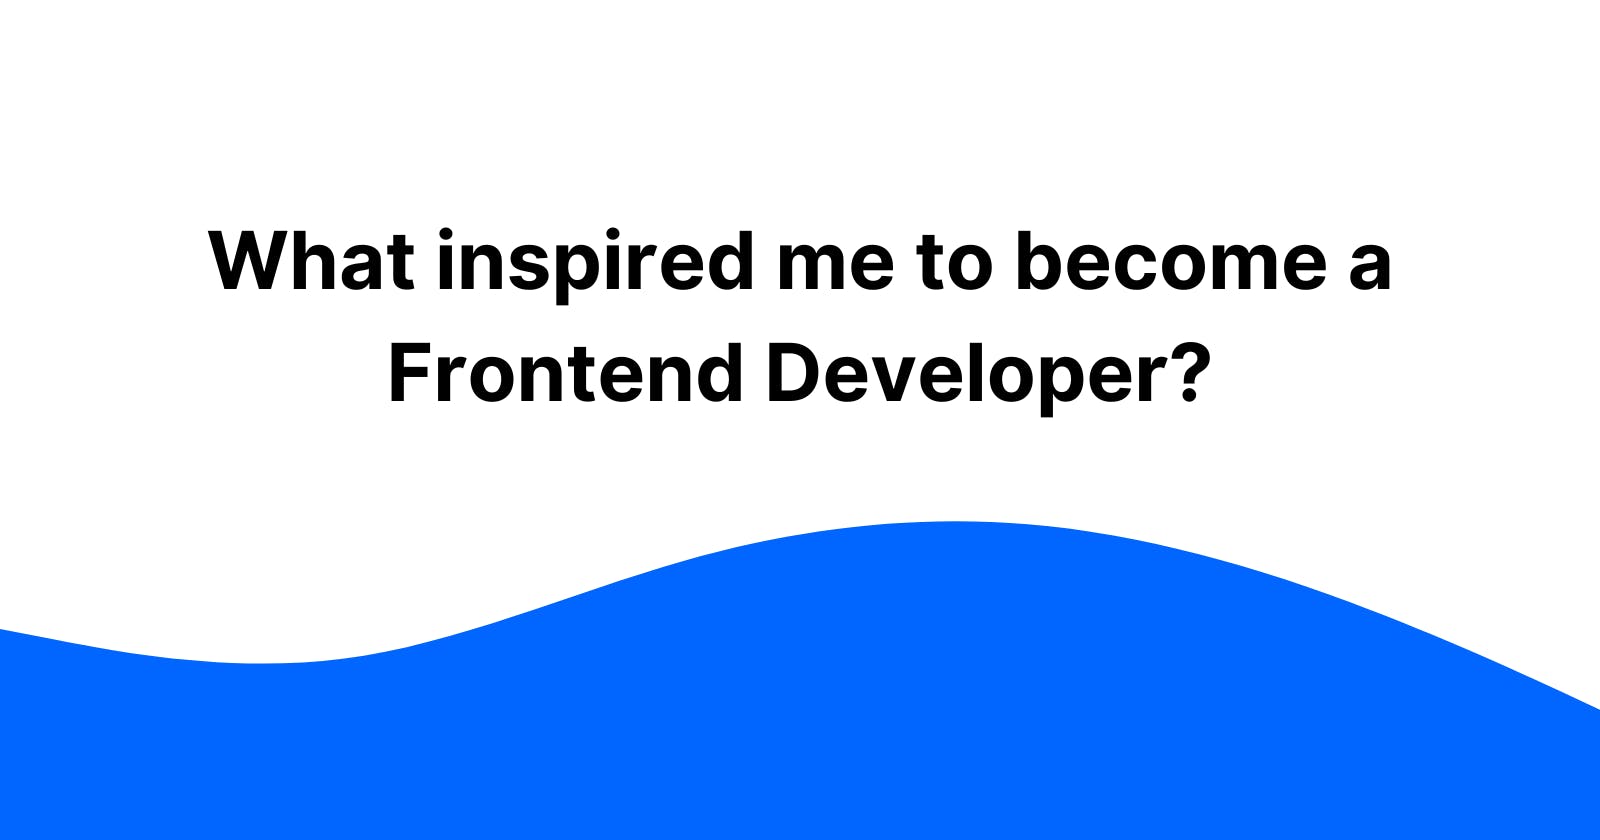 What inspired me to become a Frontend Developer?